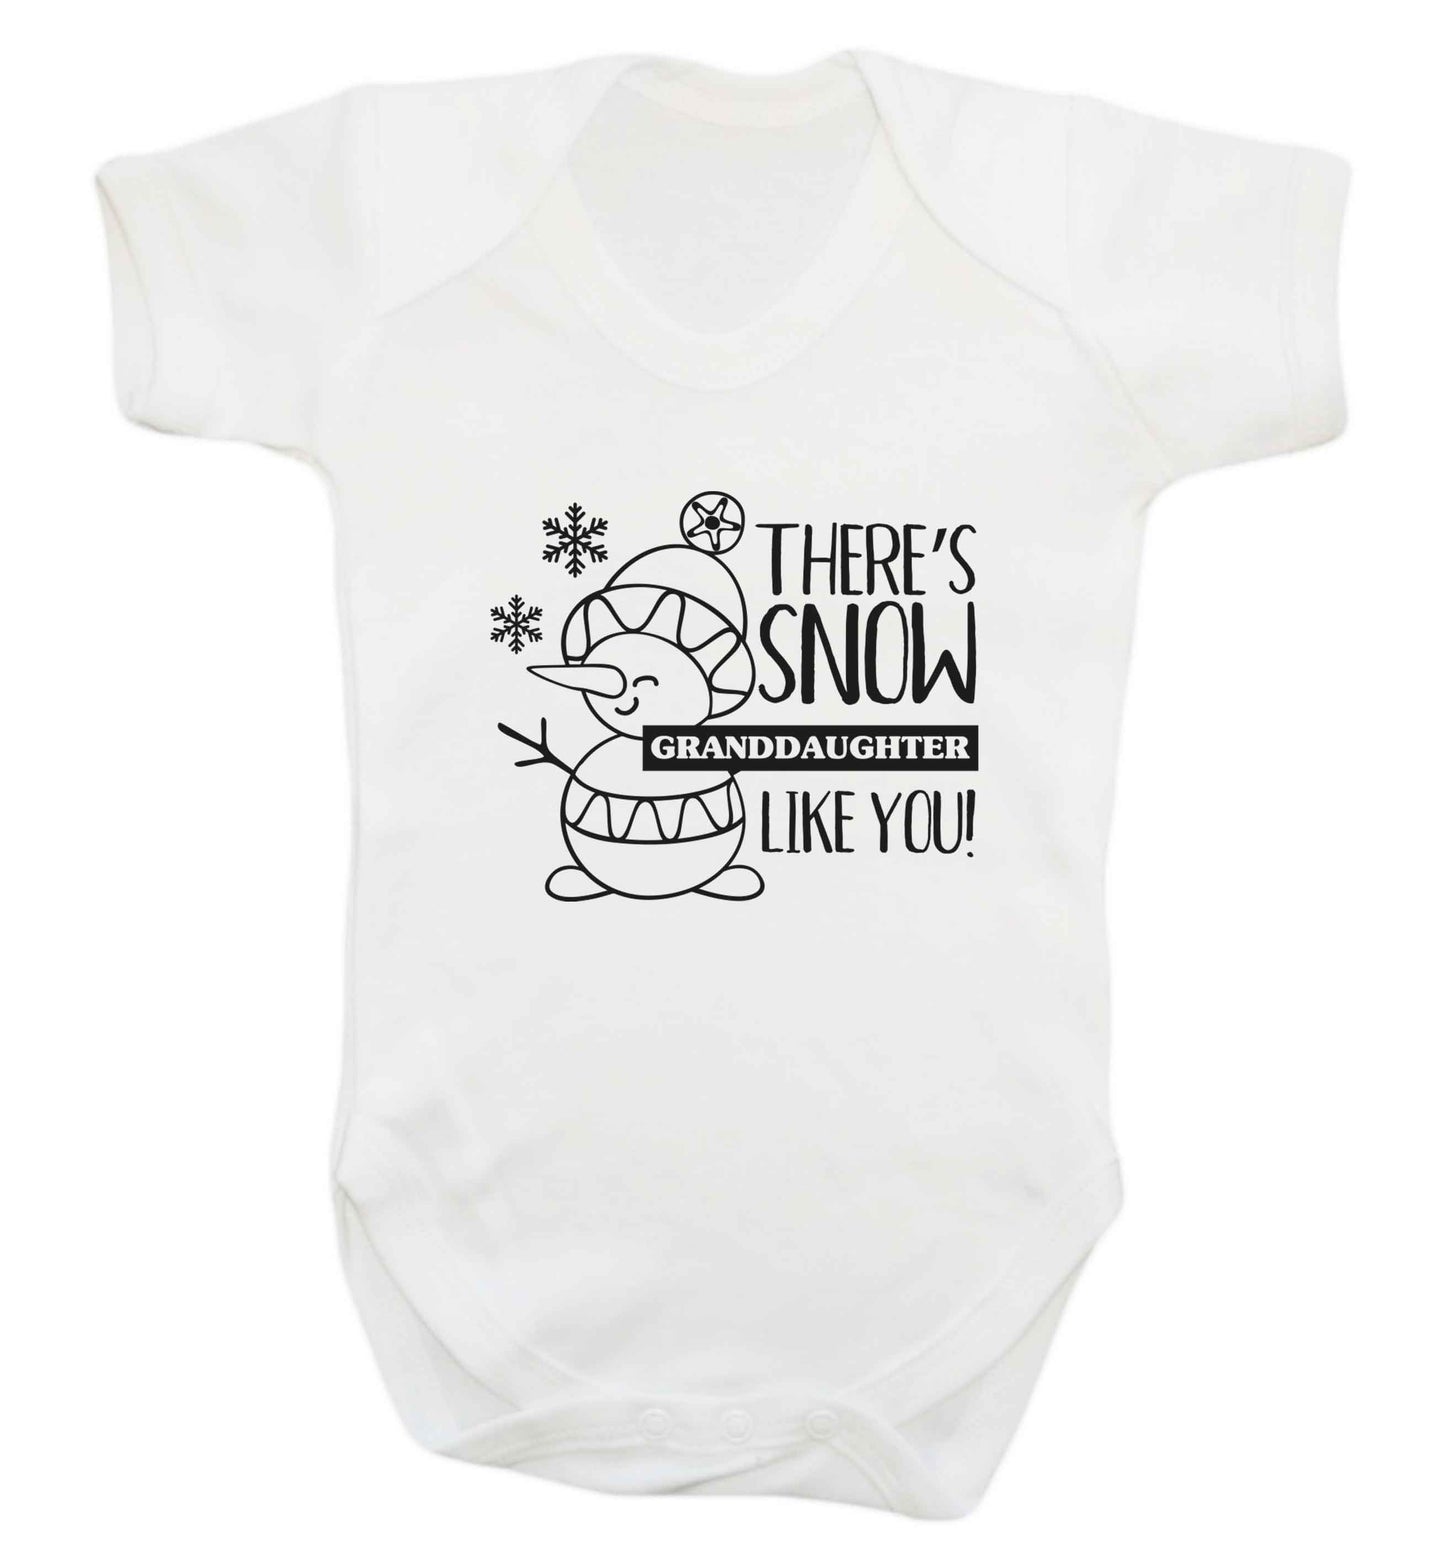 There's snow granddaughter like you baby vest white 18-24 months